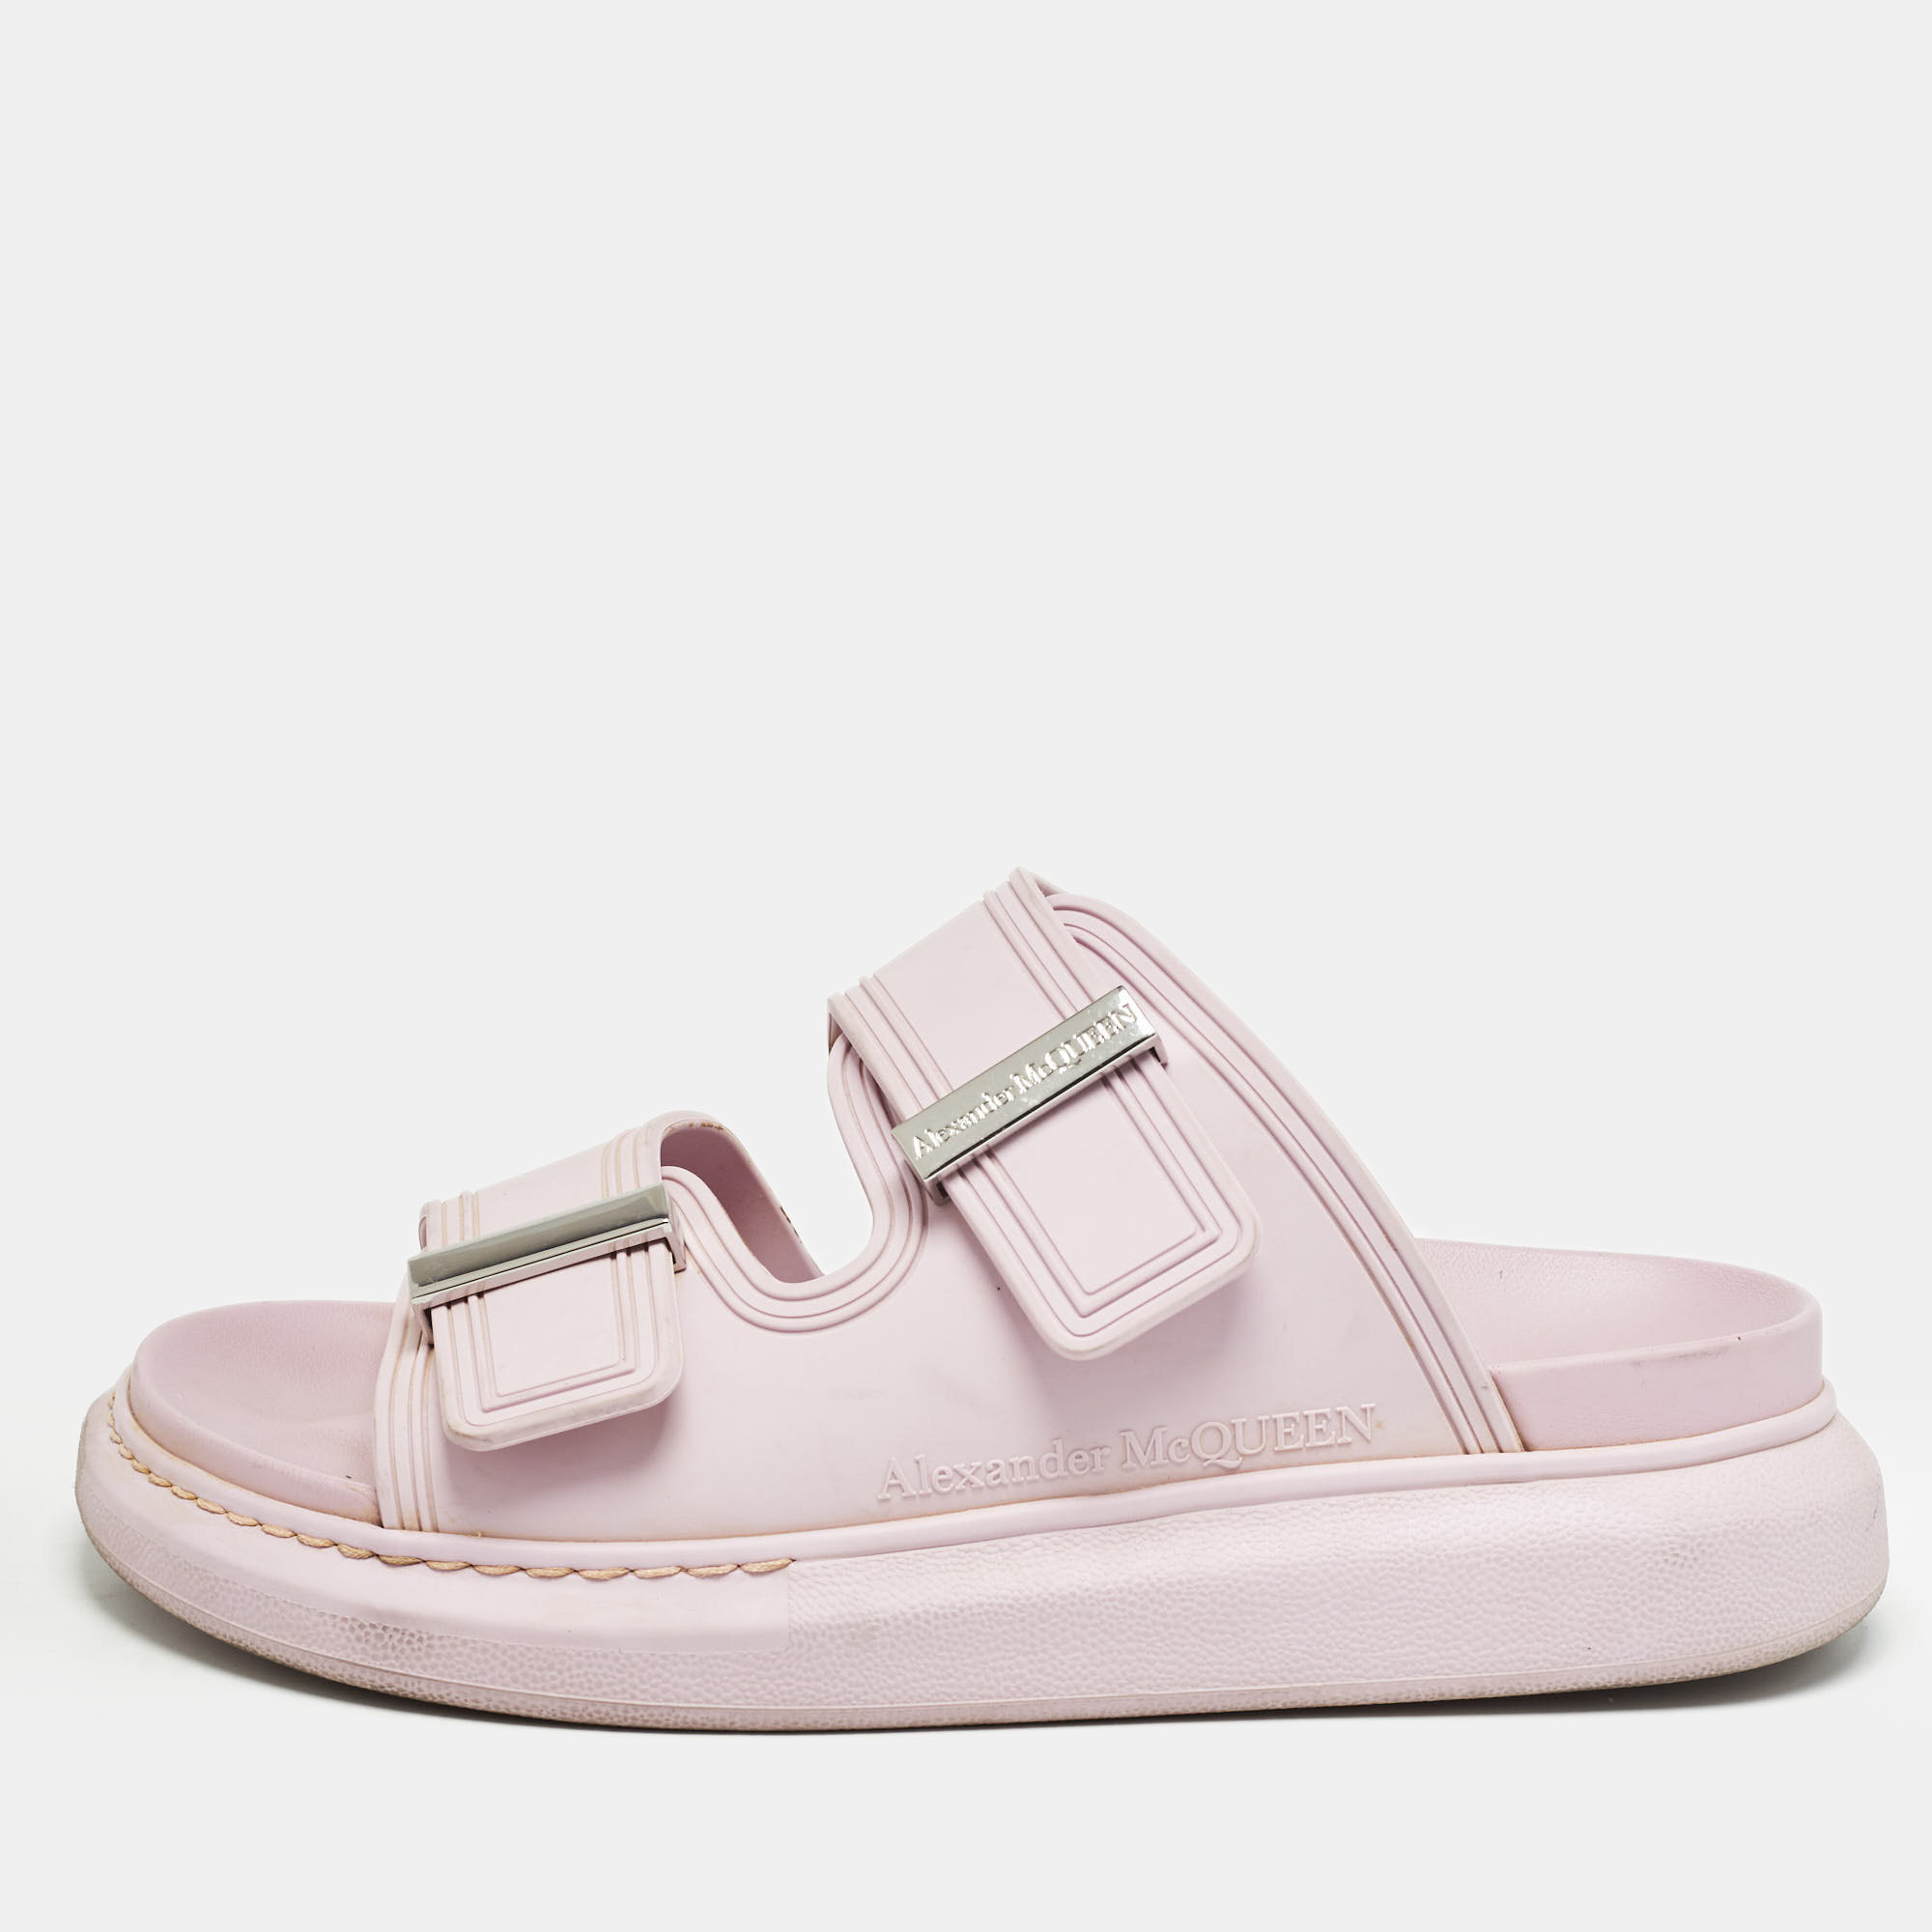 Pre-owned Alexander Mcqueen Pink Rubber Buckle Details Flat Slides Size 37